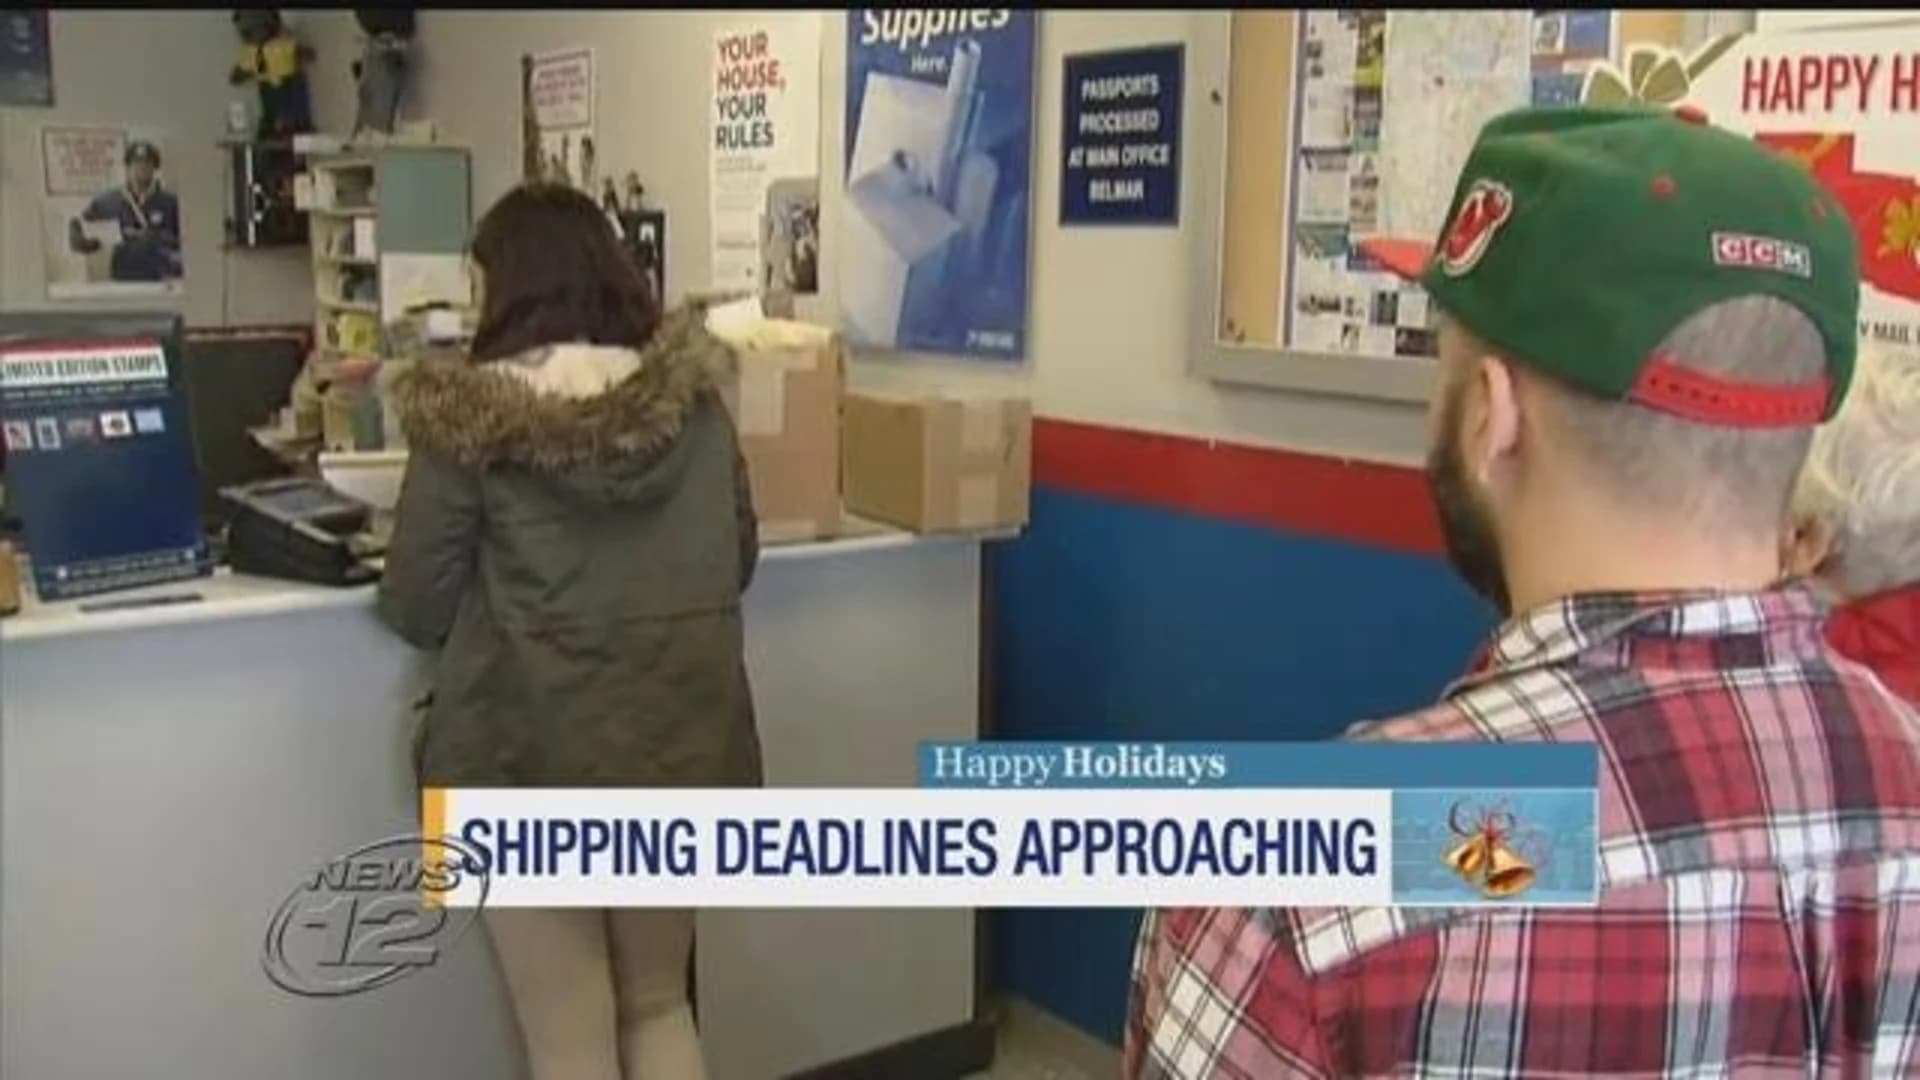 Deadlines approaching to ship gifts on time for Christmas